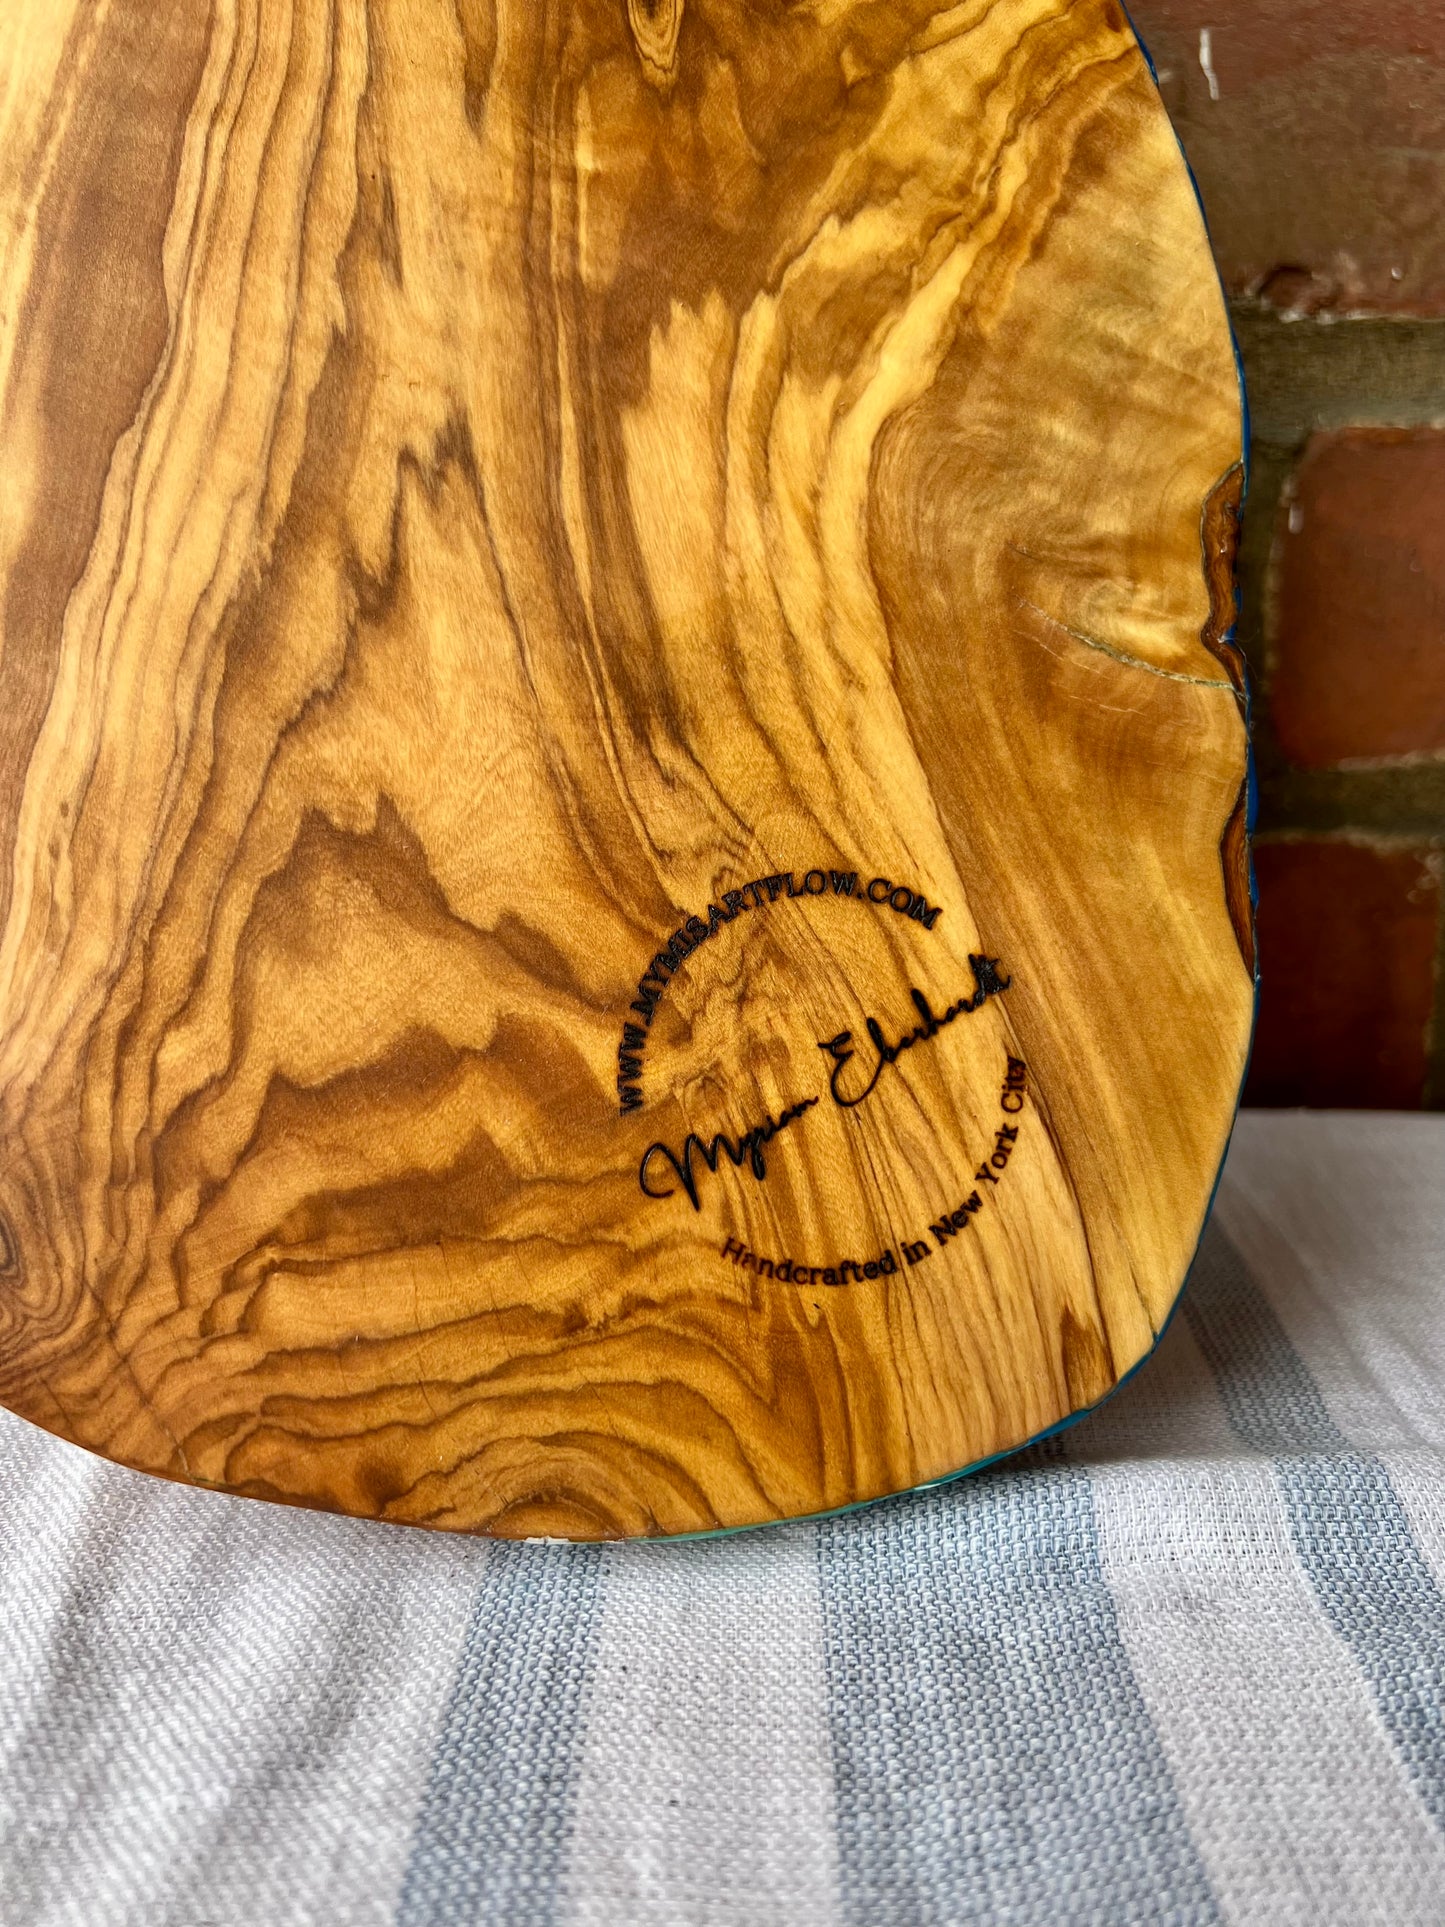 Small Olive Wood Ocean Wave Cheese Board